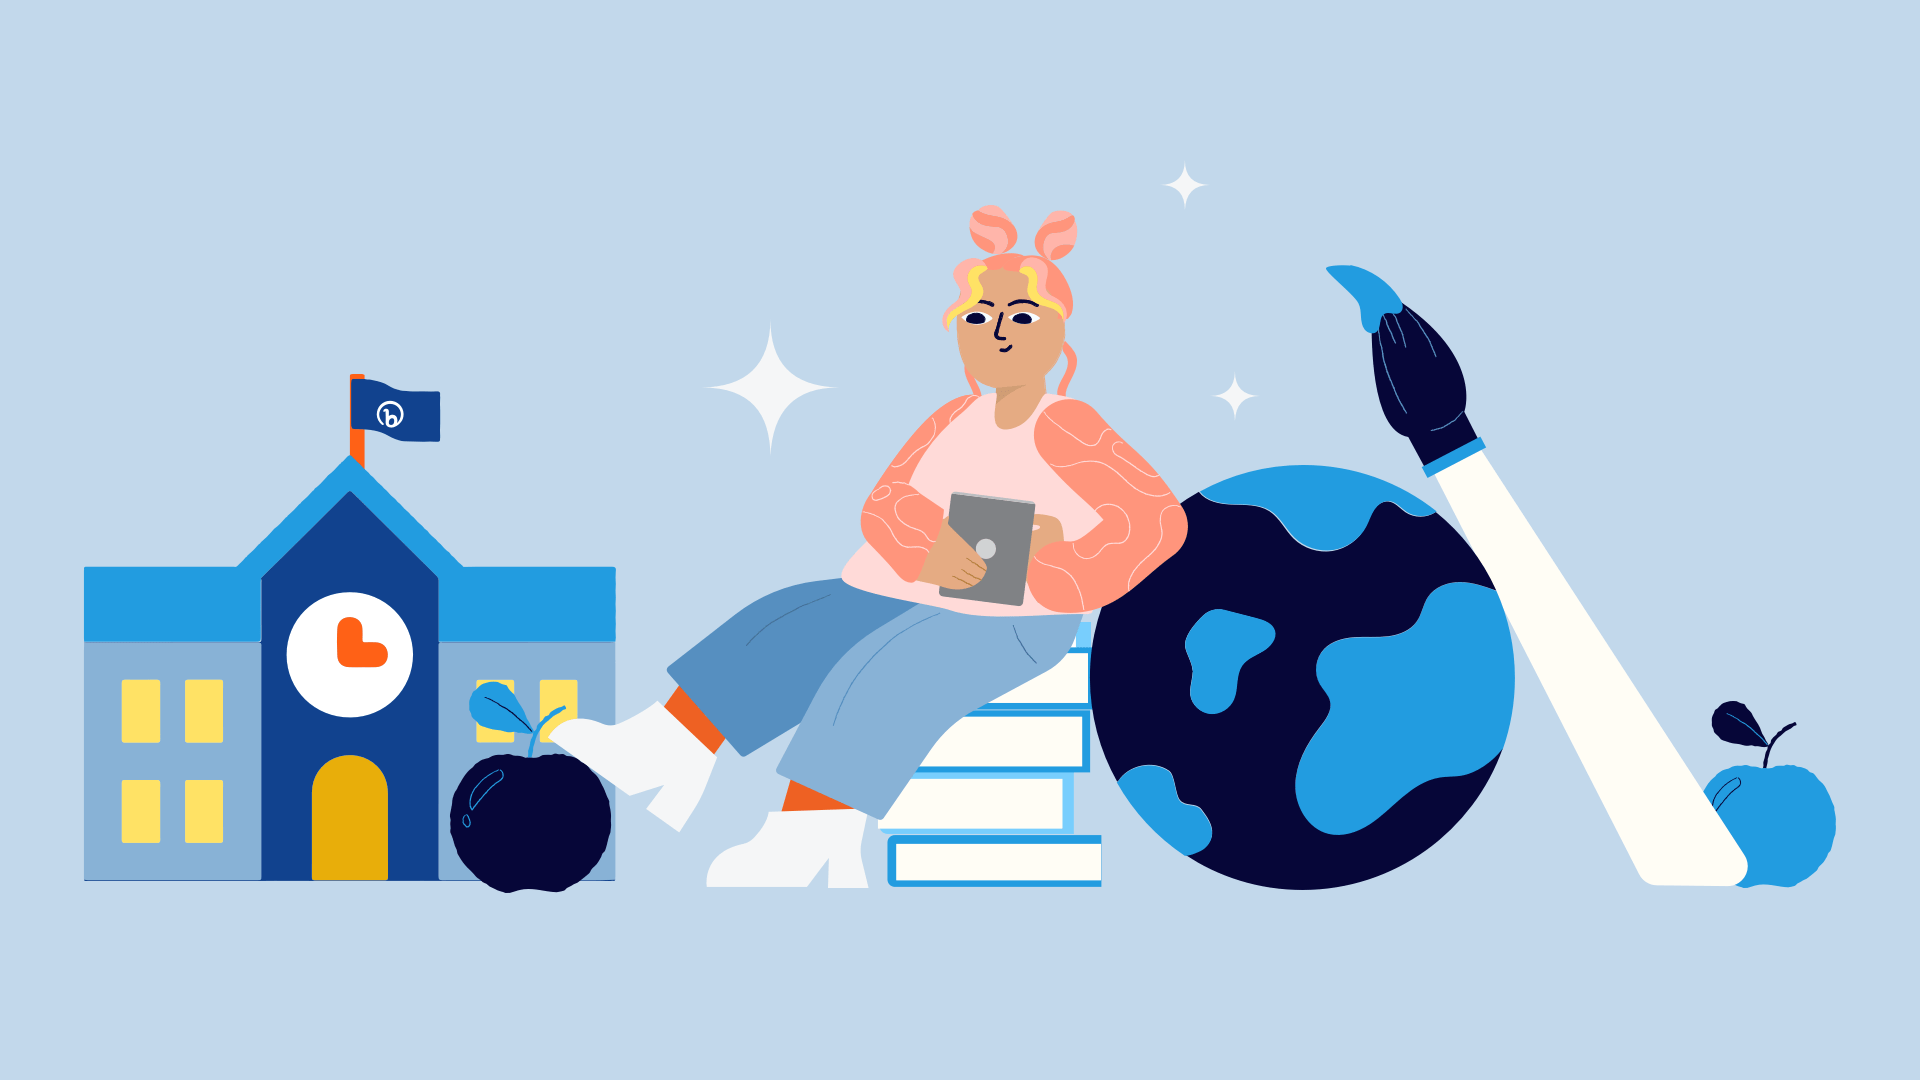 Illustration of a person on a university campus with an ipad.